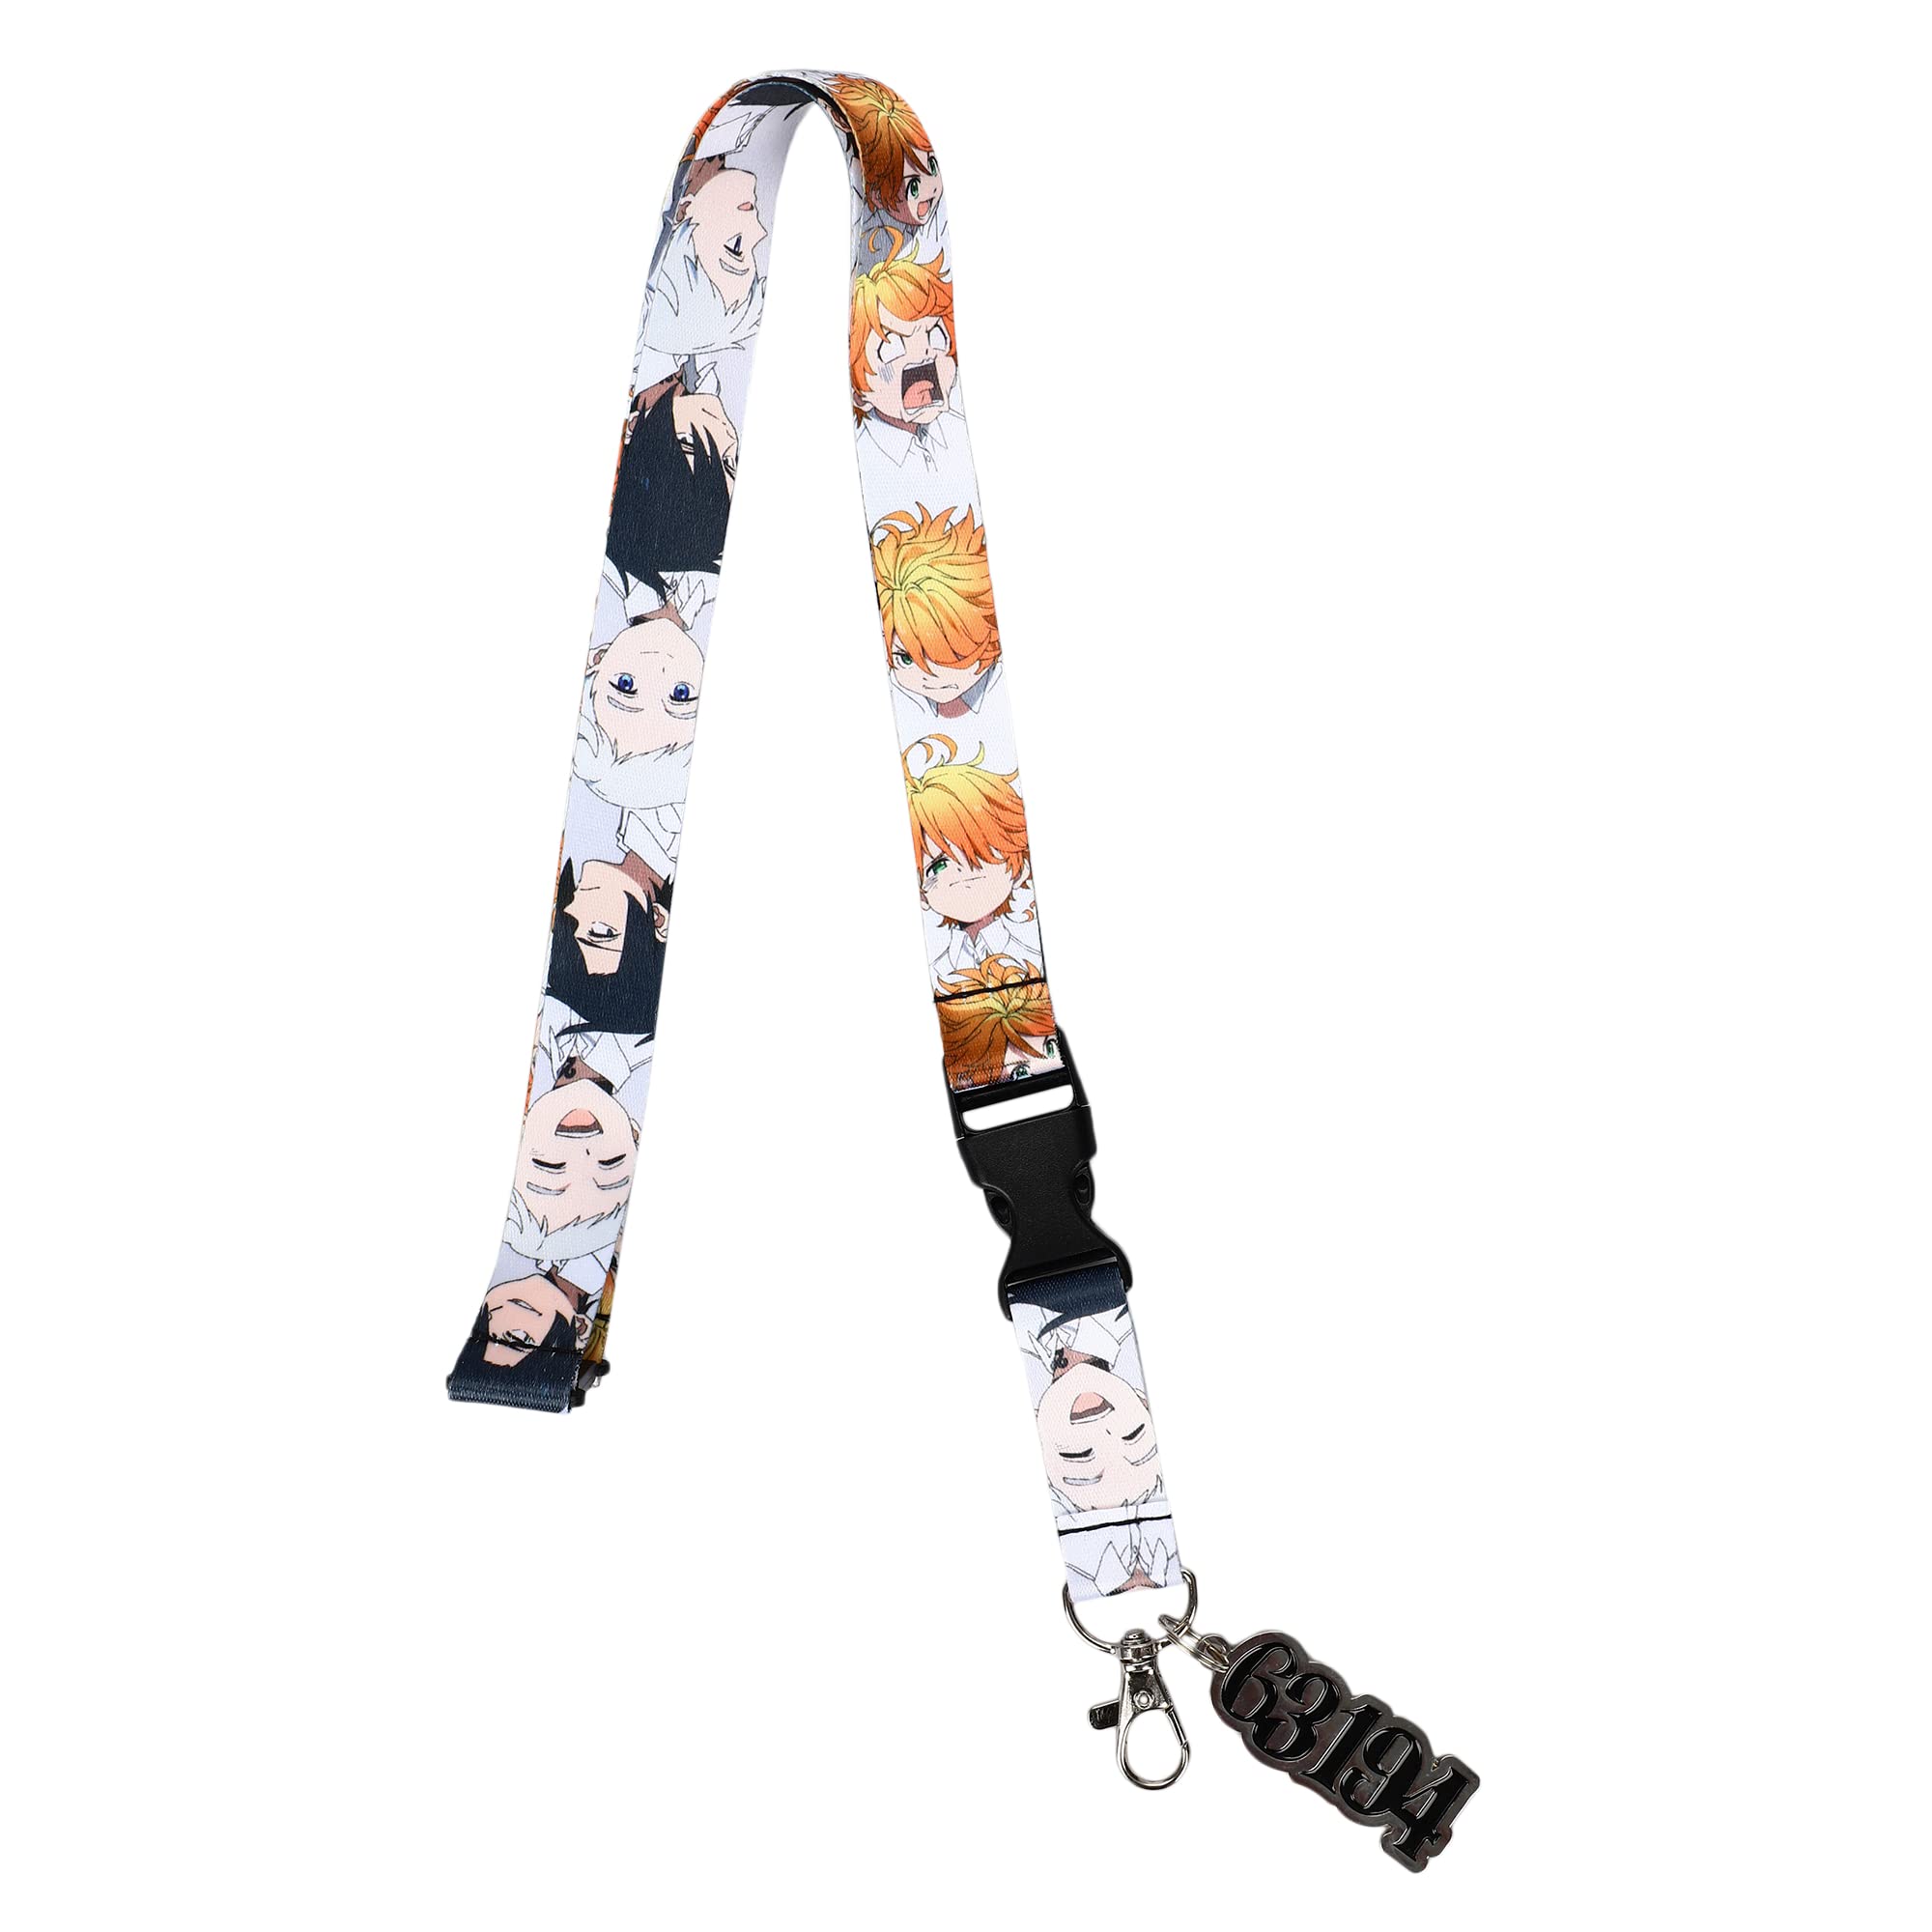 The Promised Neverland Lanyard with Clear ID Sleeve and Keychain